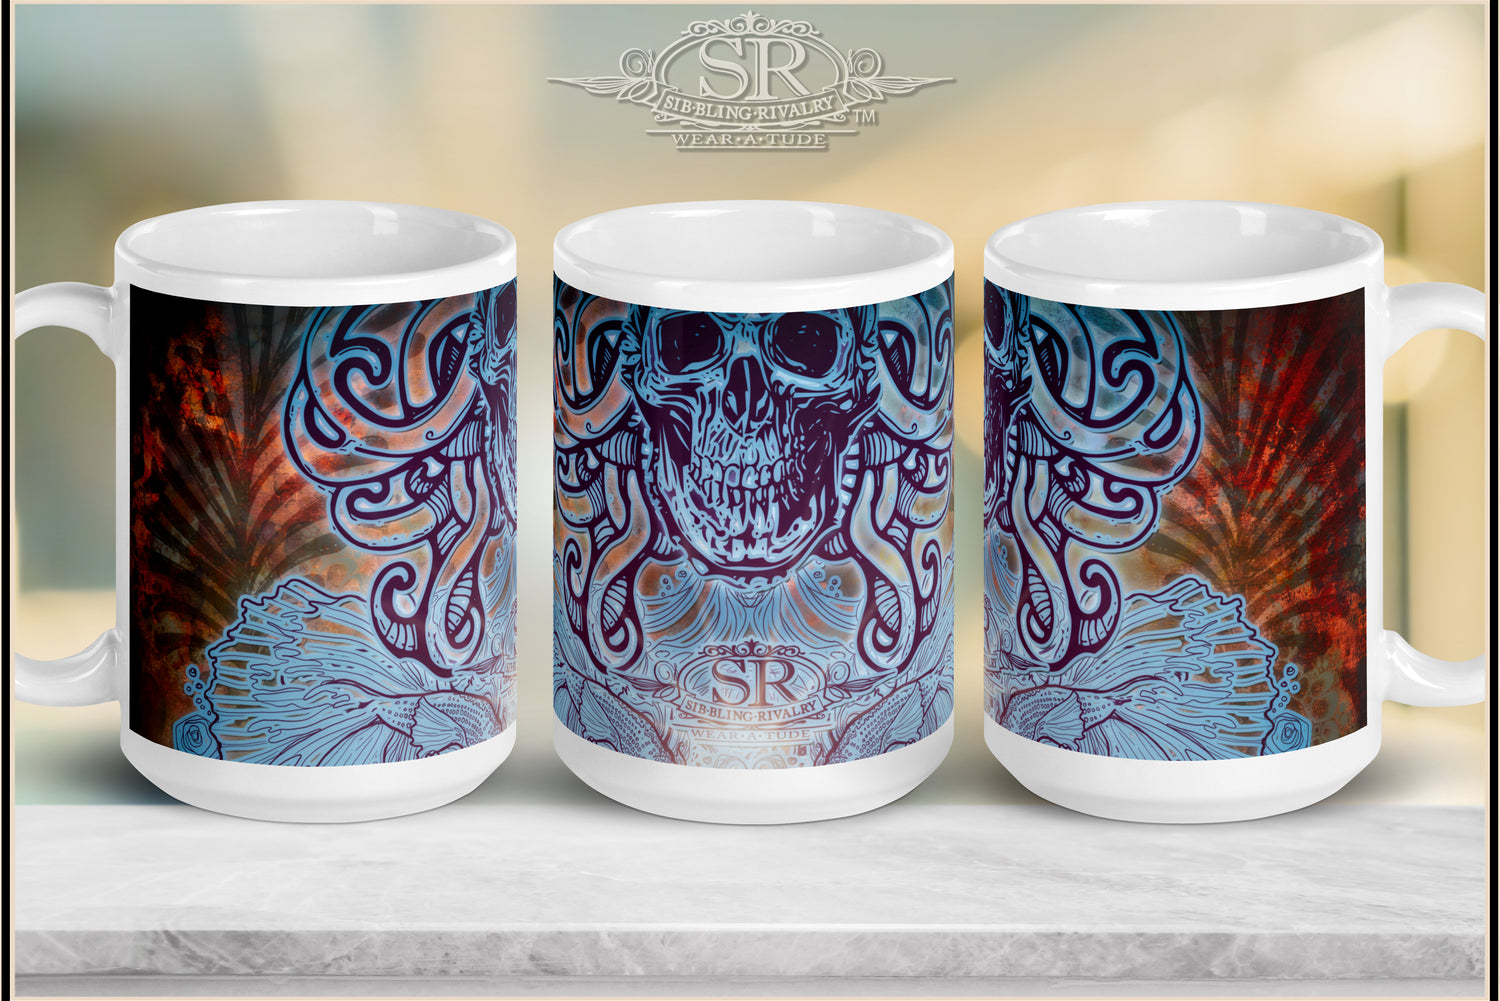 Cool serpent skull coffee mug. Unique bold tattoo skull design. Rich blues and a red rust background pattern. SR Wear Atude, Sibbling Rivalry Design, Rock N Roll 